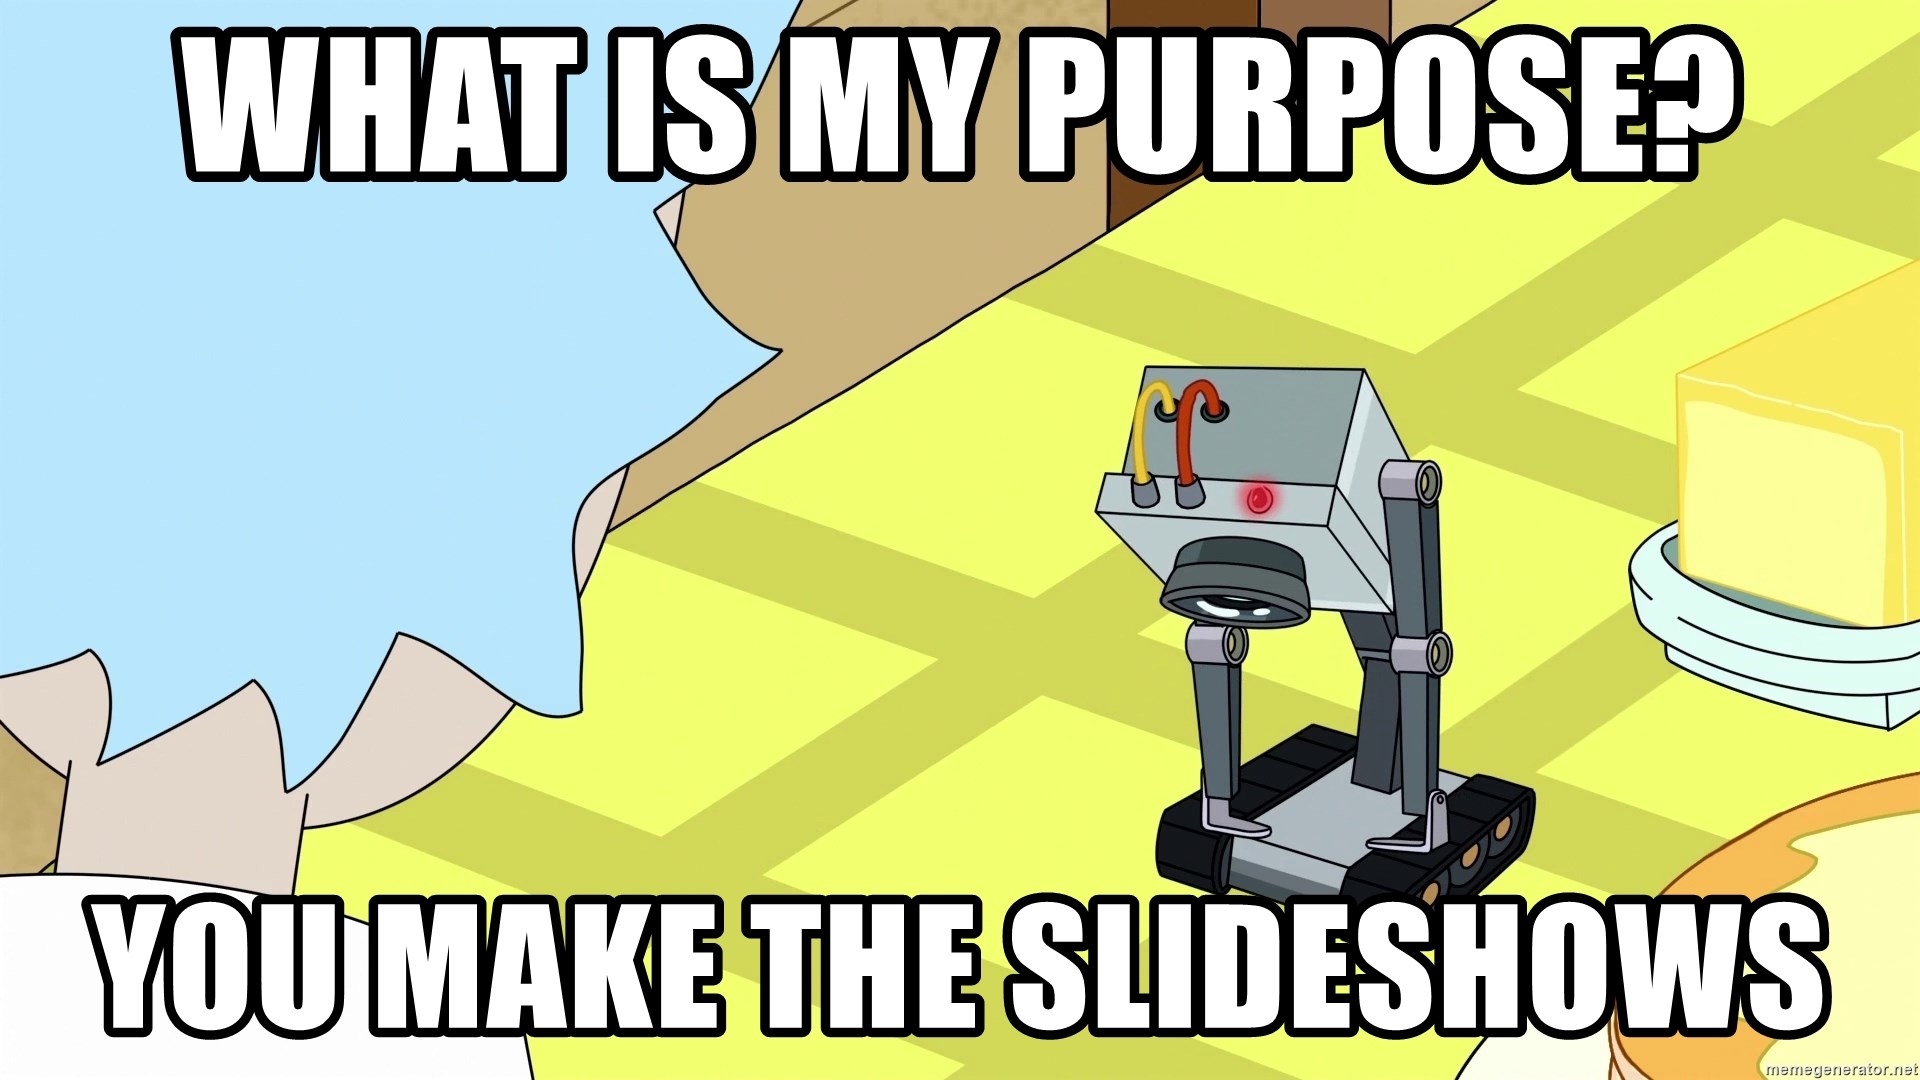 What is my Purpose Butter Robot - What is my purpose? You make the Slideshows